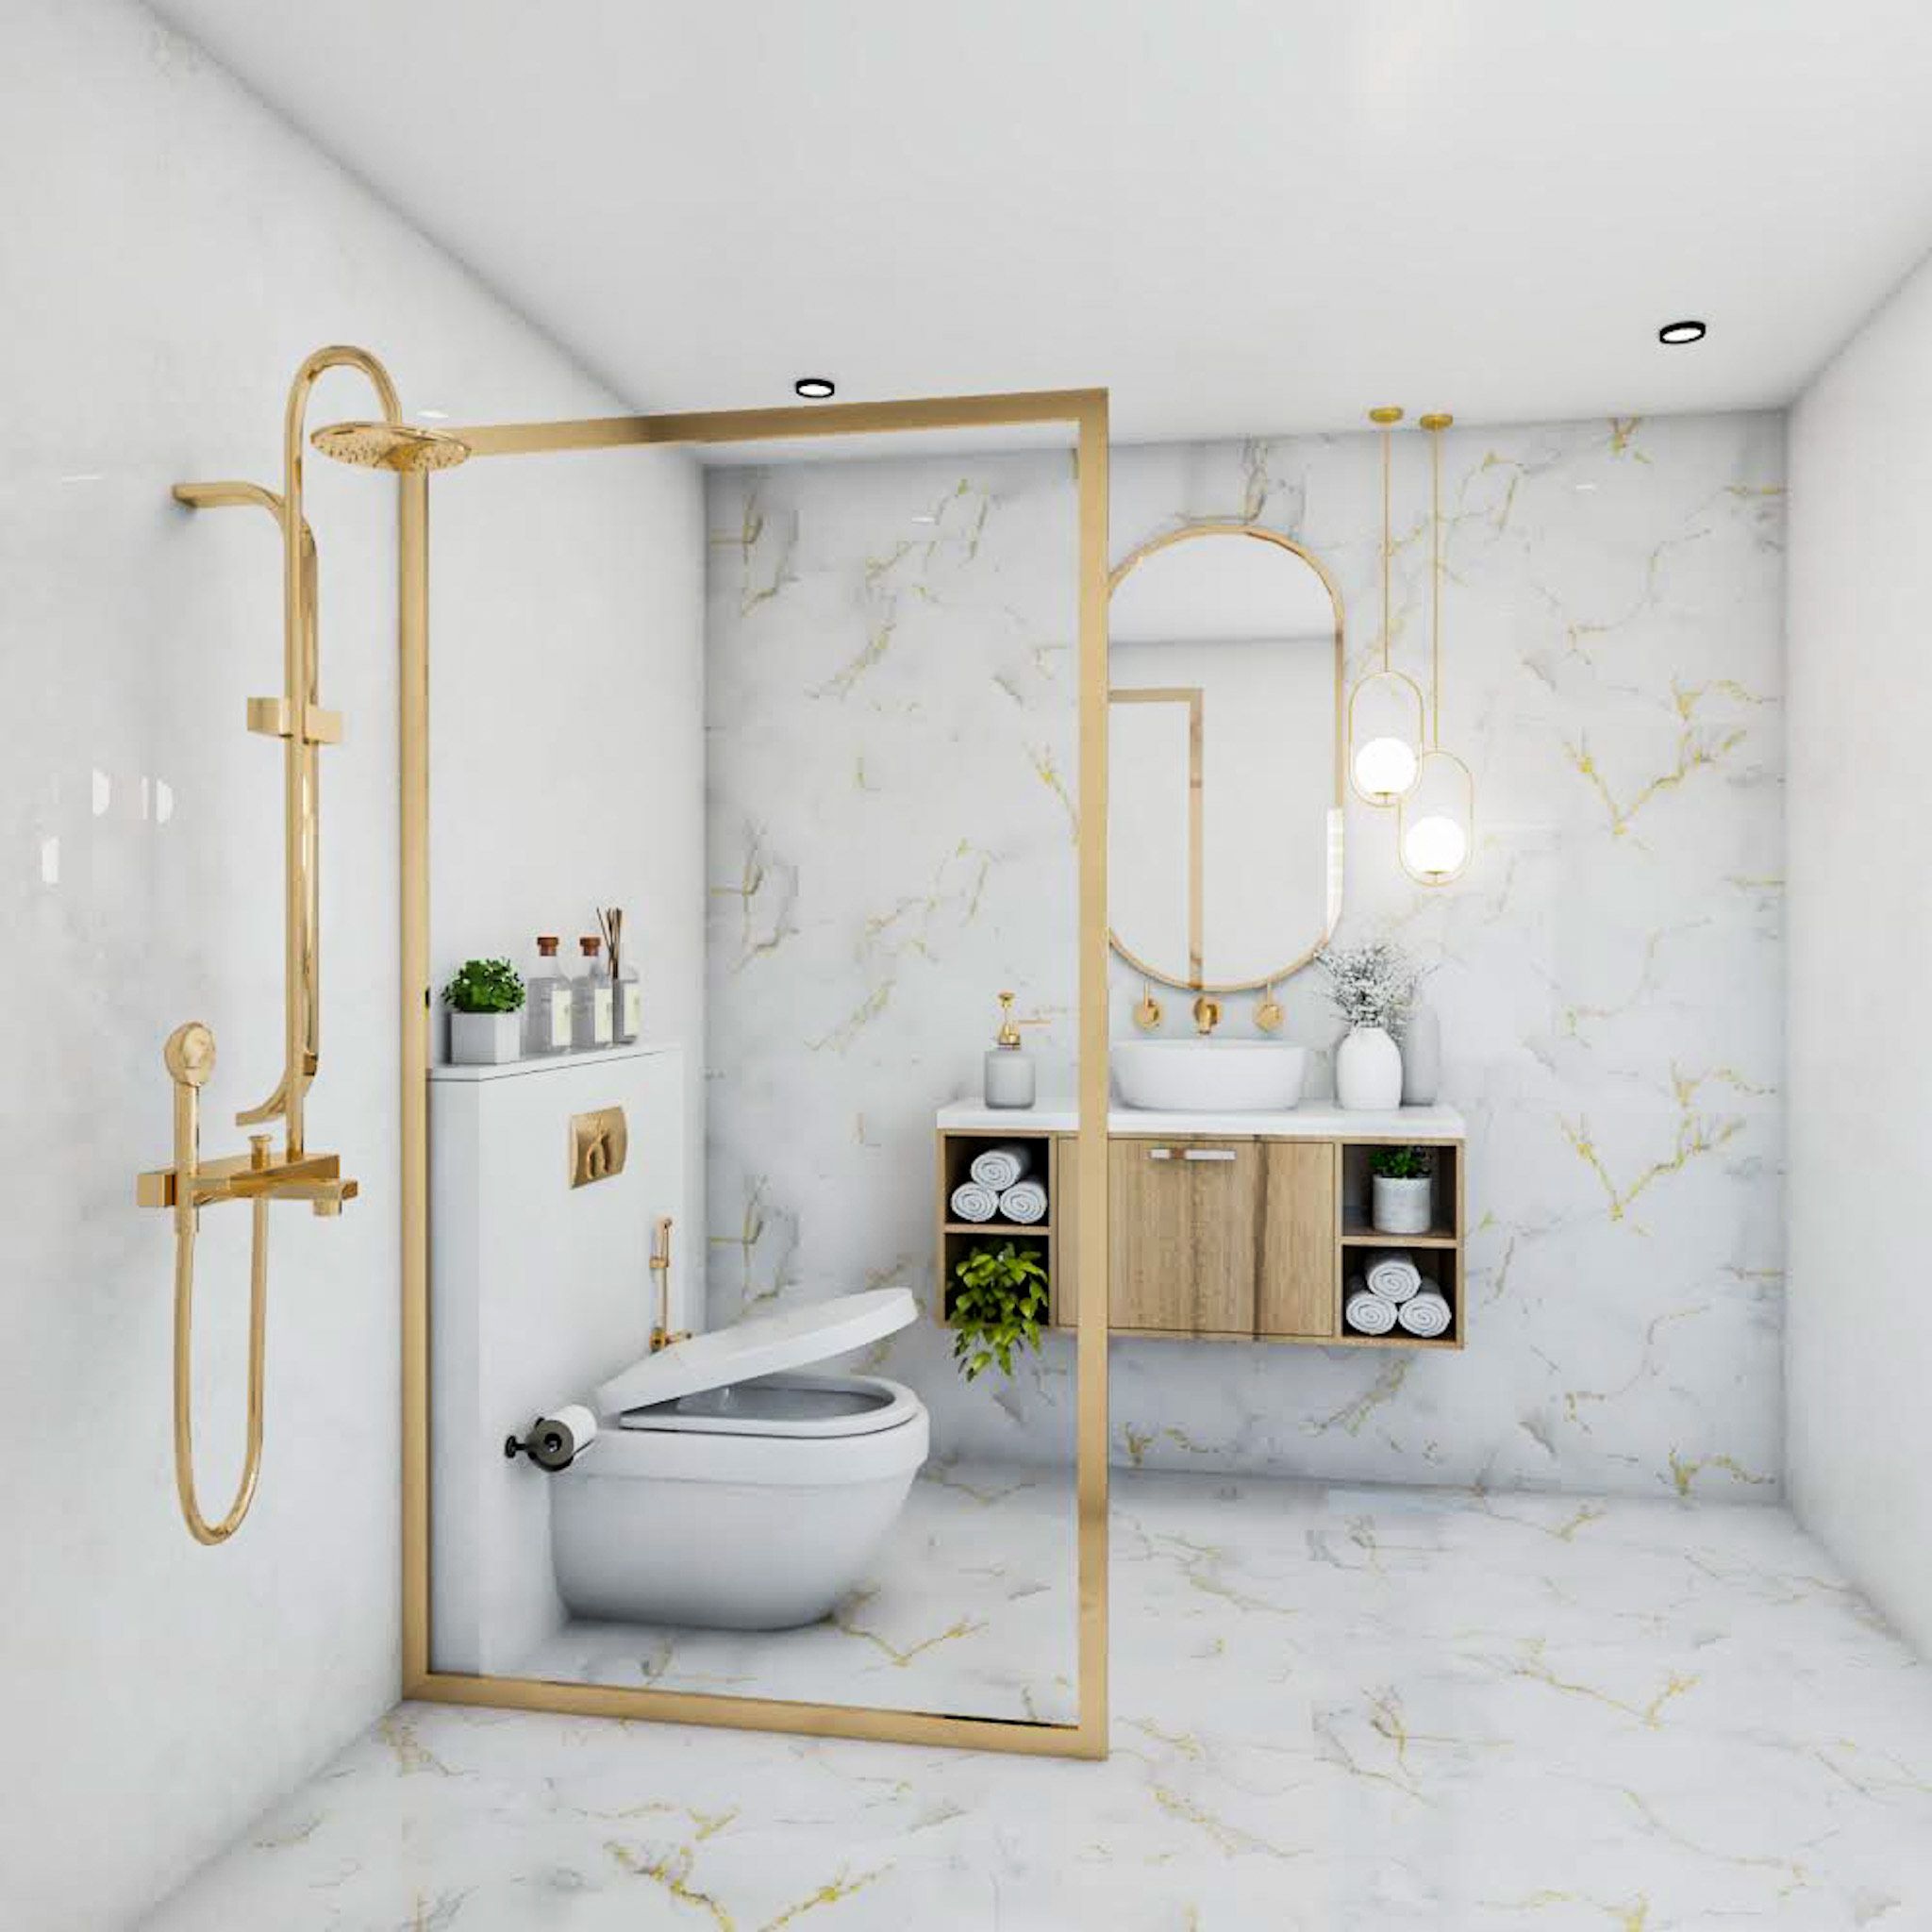 Classic Bathroom Design With White Wall And Floor Tiles